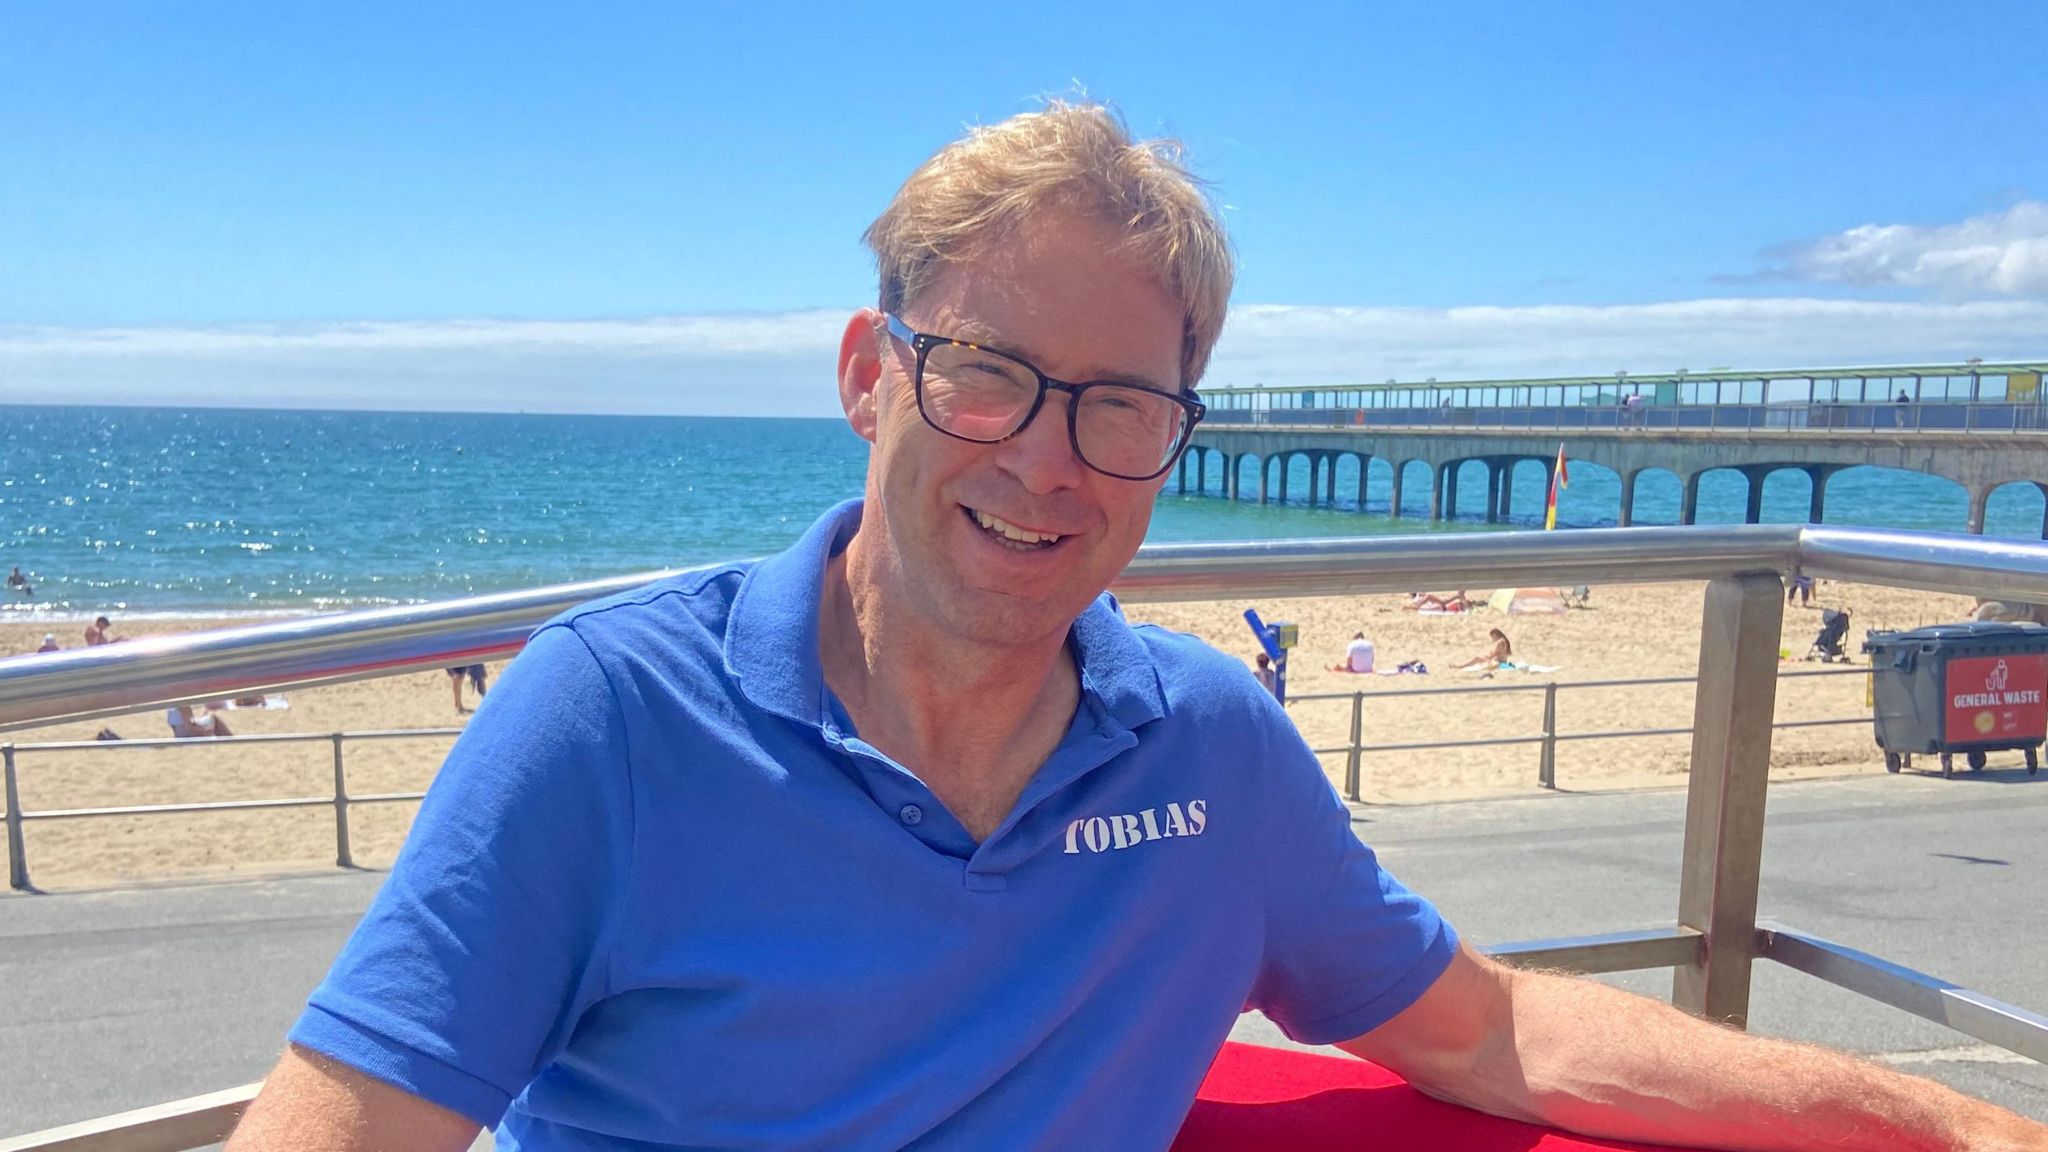 Conservative Tobias Ellwood wears a blue polos shirt with his name on it and dark-rimmed glasses